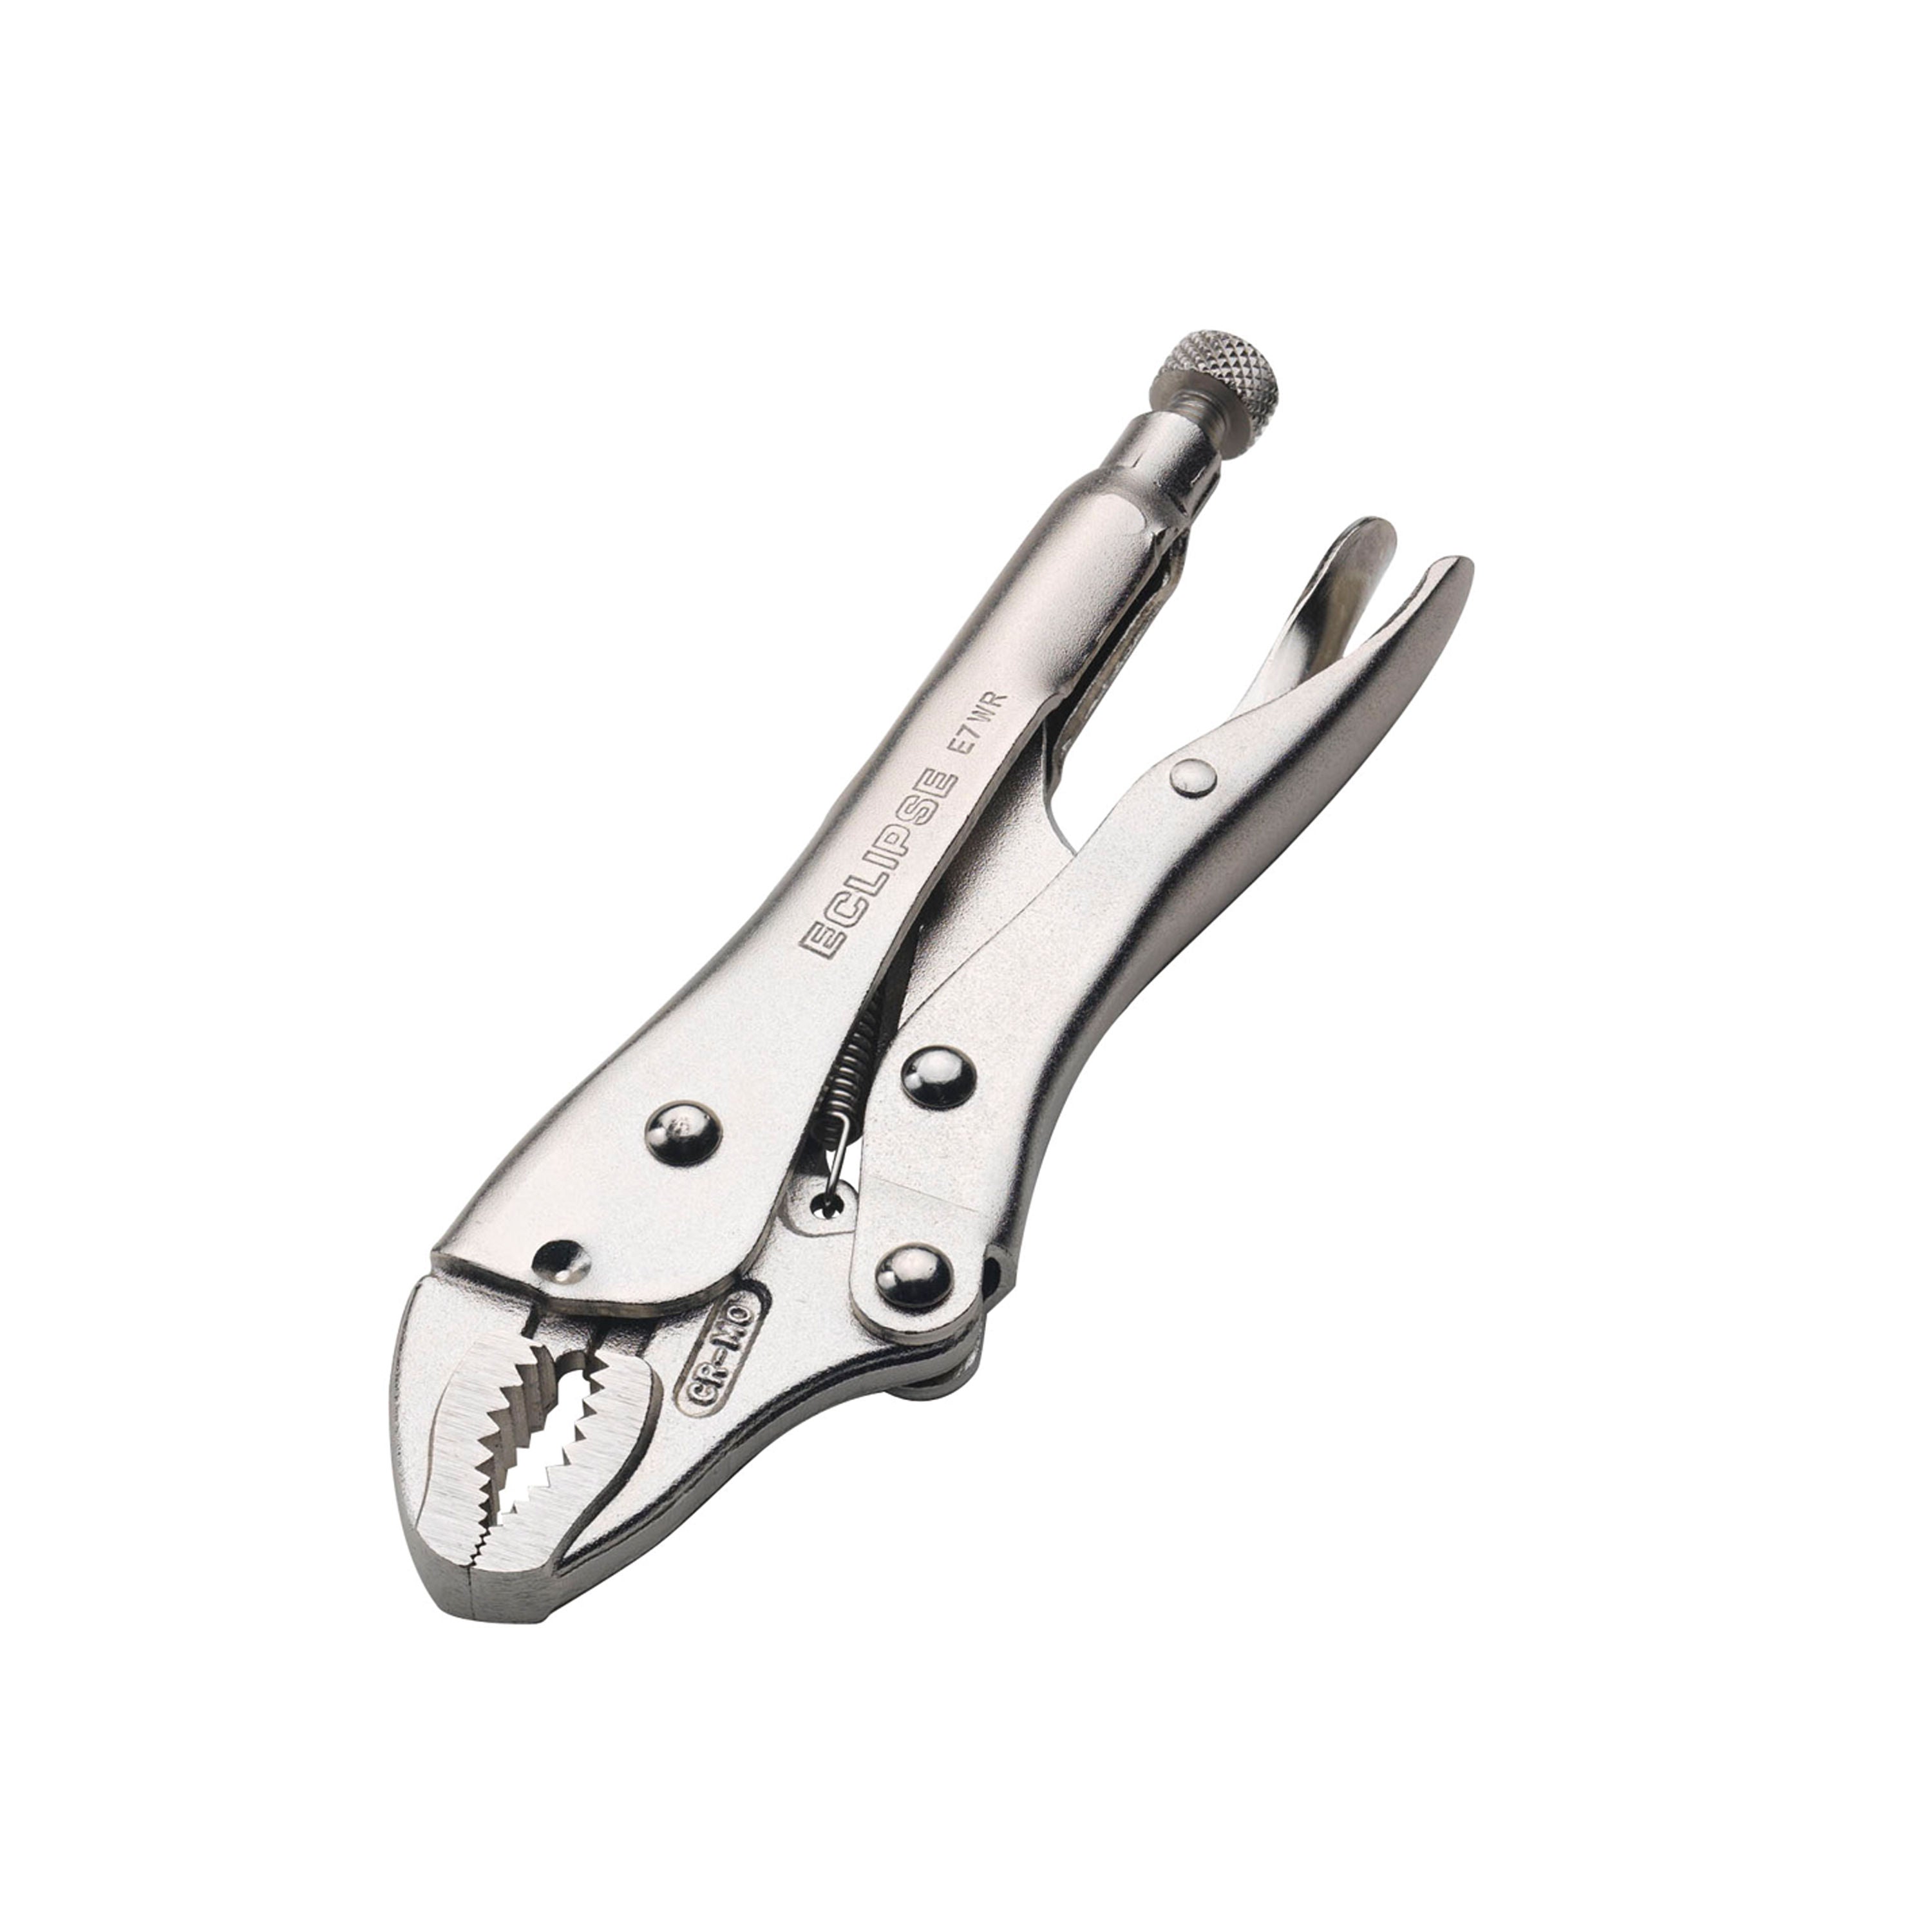 Locking Pliers - Curved Jaw with Wire Cutters 10"